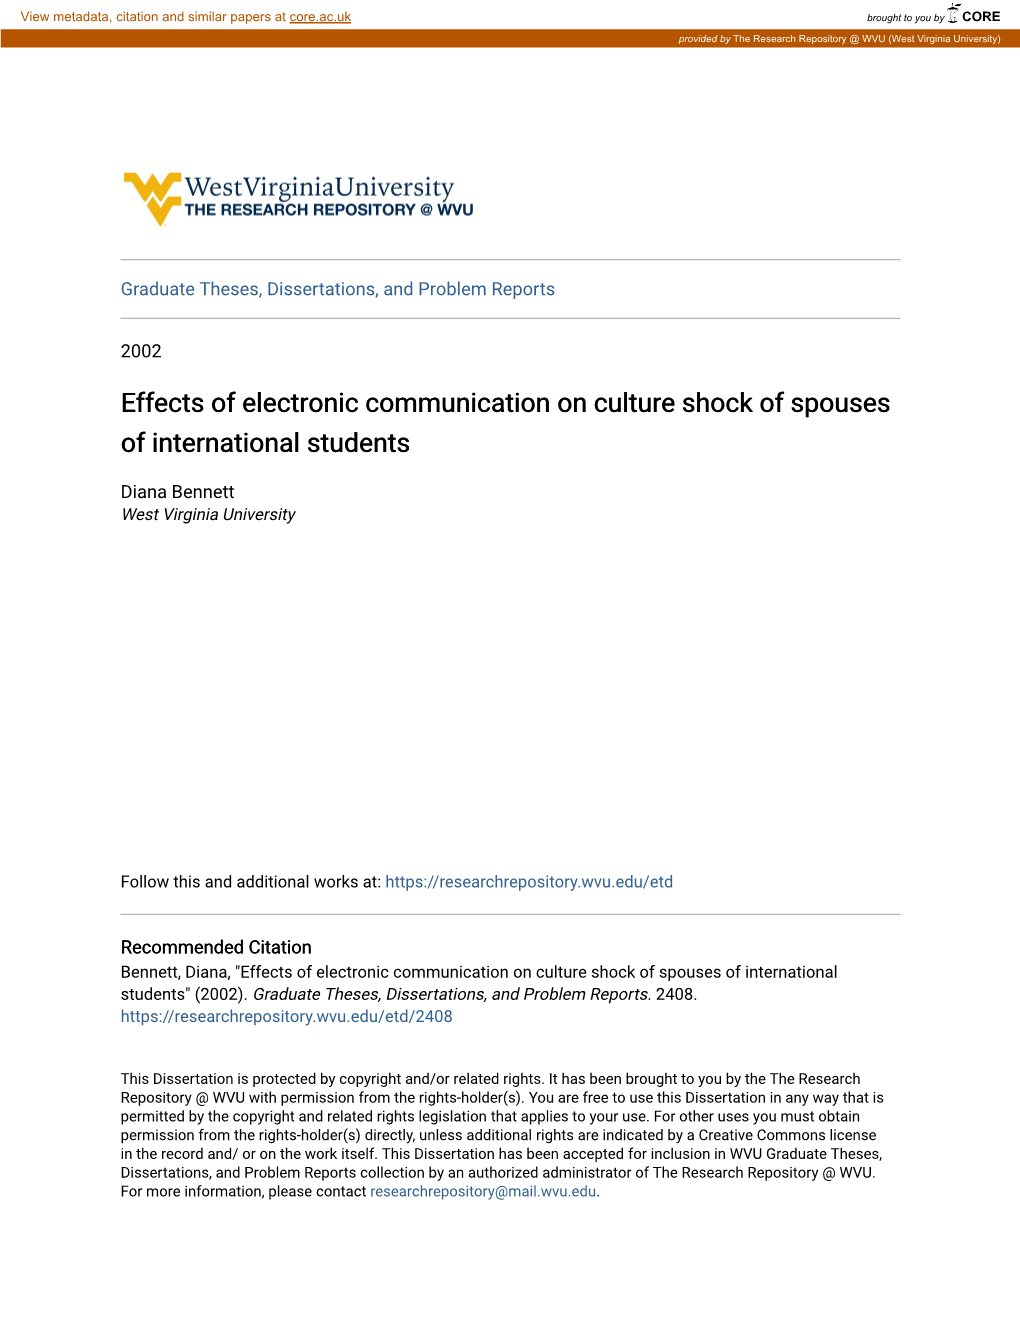 Effects of Electronic Communication on Culture Shock of Spouses of International Students